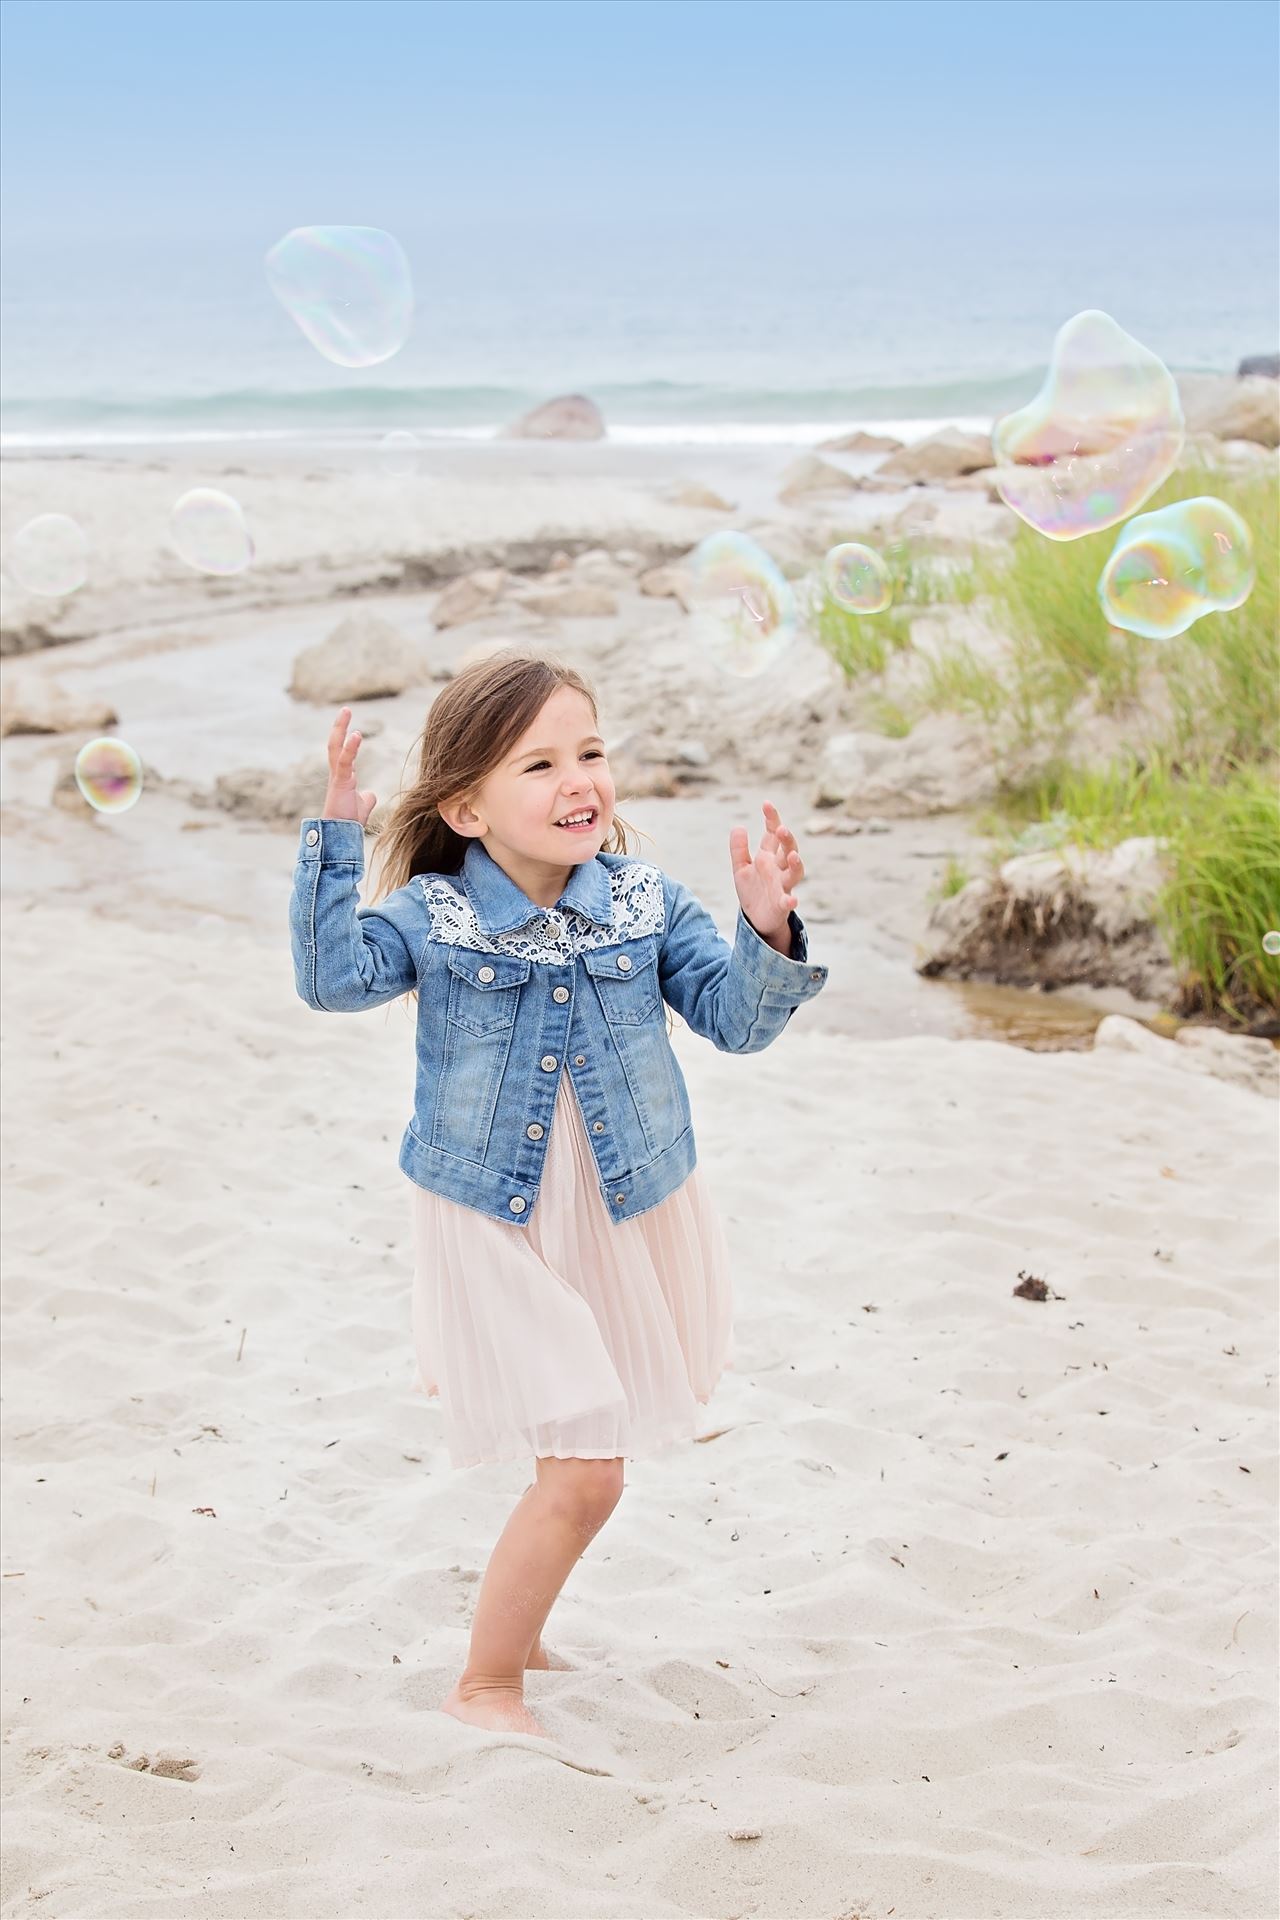 HalfyardFamily 23 Halfyard Family. Family photography beach session. by Maria Angelopoulos Photogrpahy